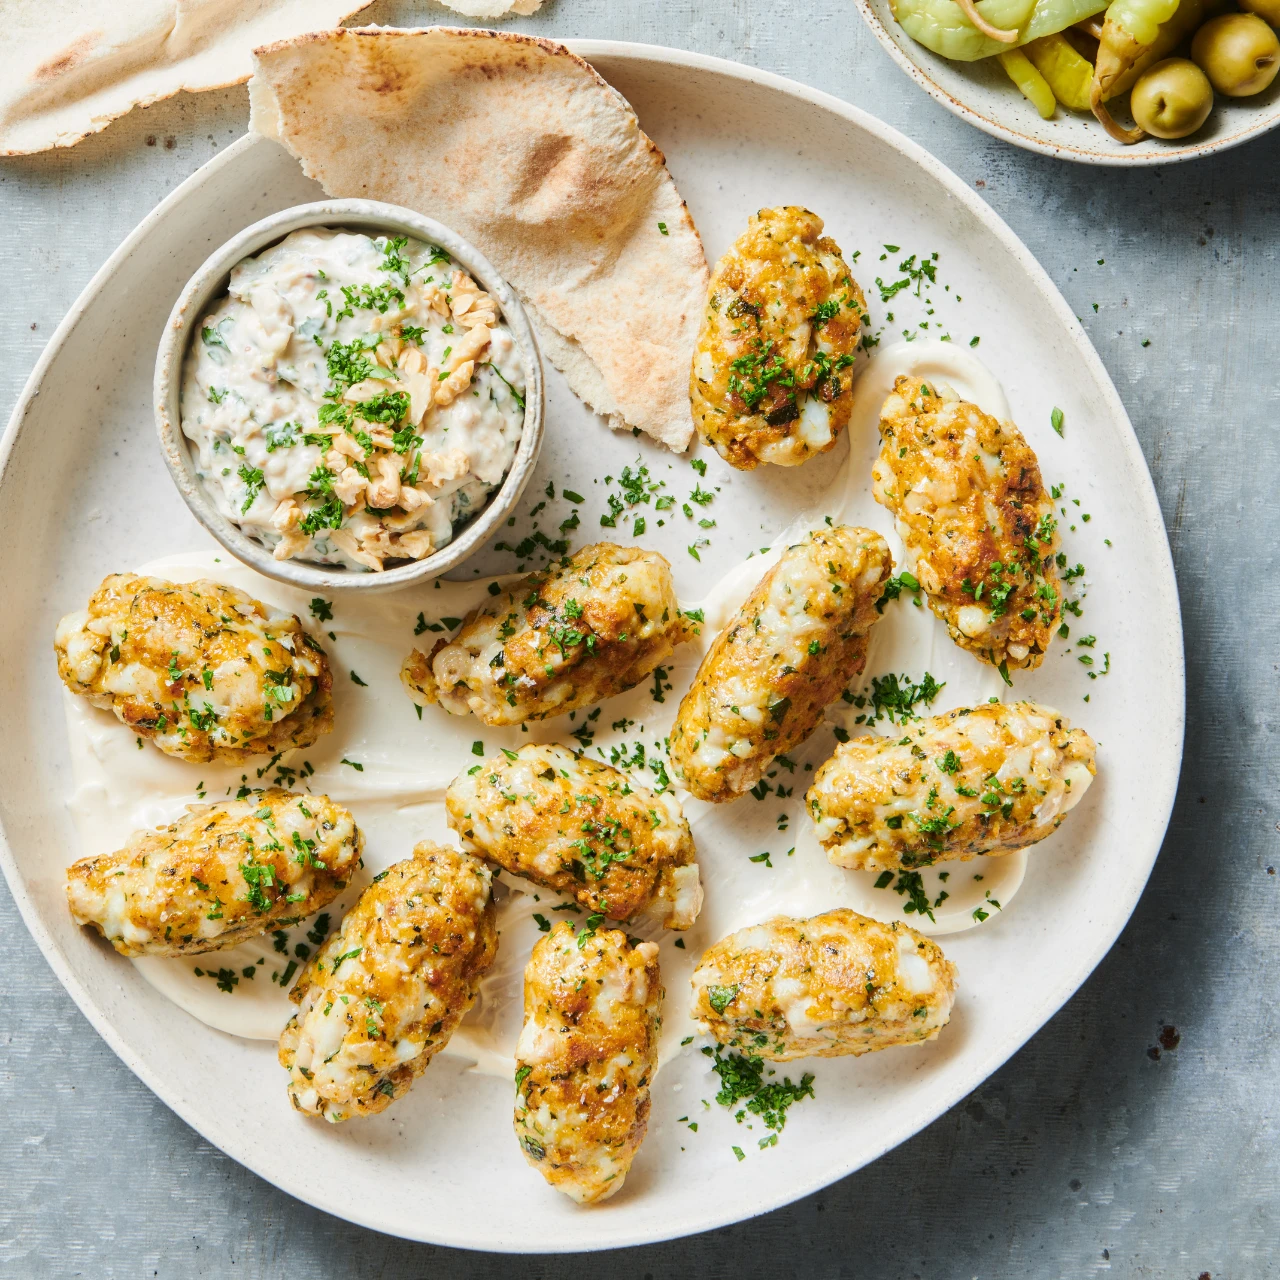 This recipe is a great alternative to lamb koftas. Using white fish, our Fish Koftas are good for sharing platters.